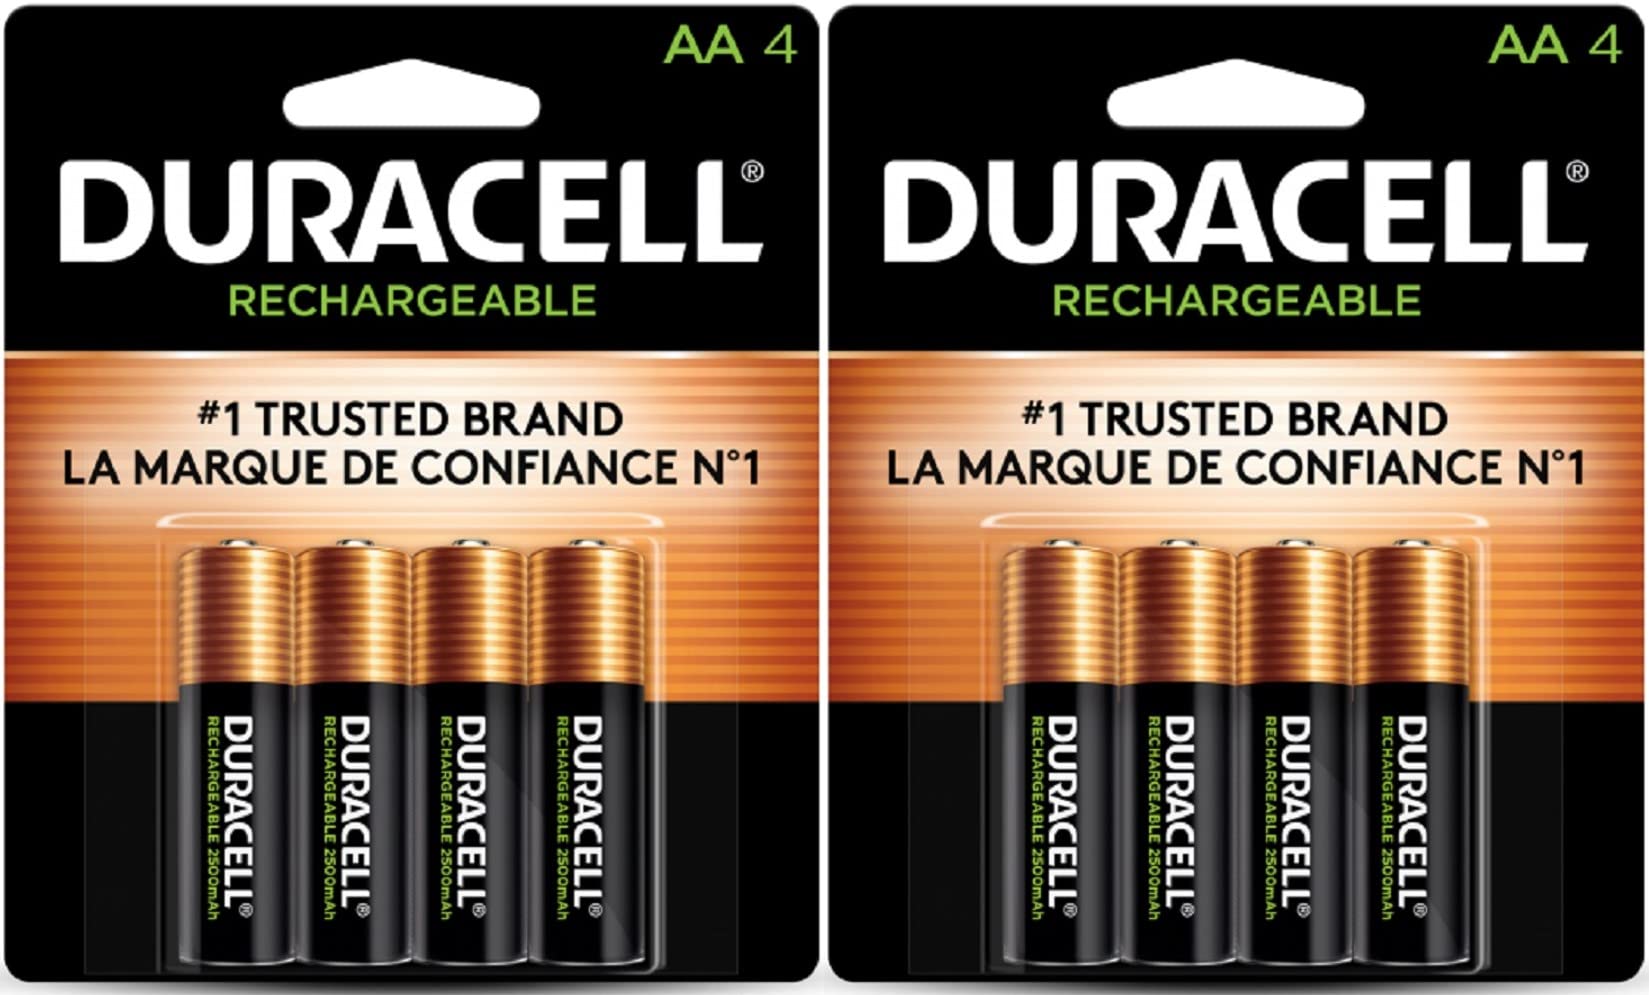 Duracell Rechargeable AA NiMH Batteries, MIGNON/HR6/DC1500, 2450mAh, 8-Count Package